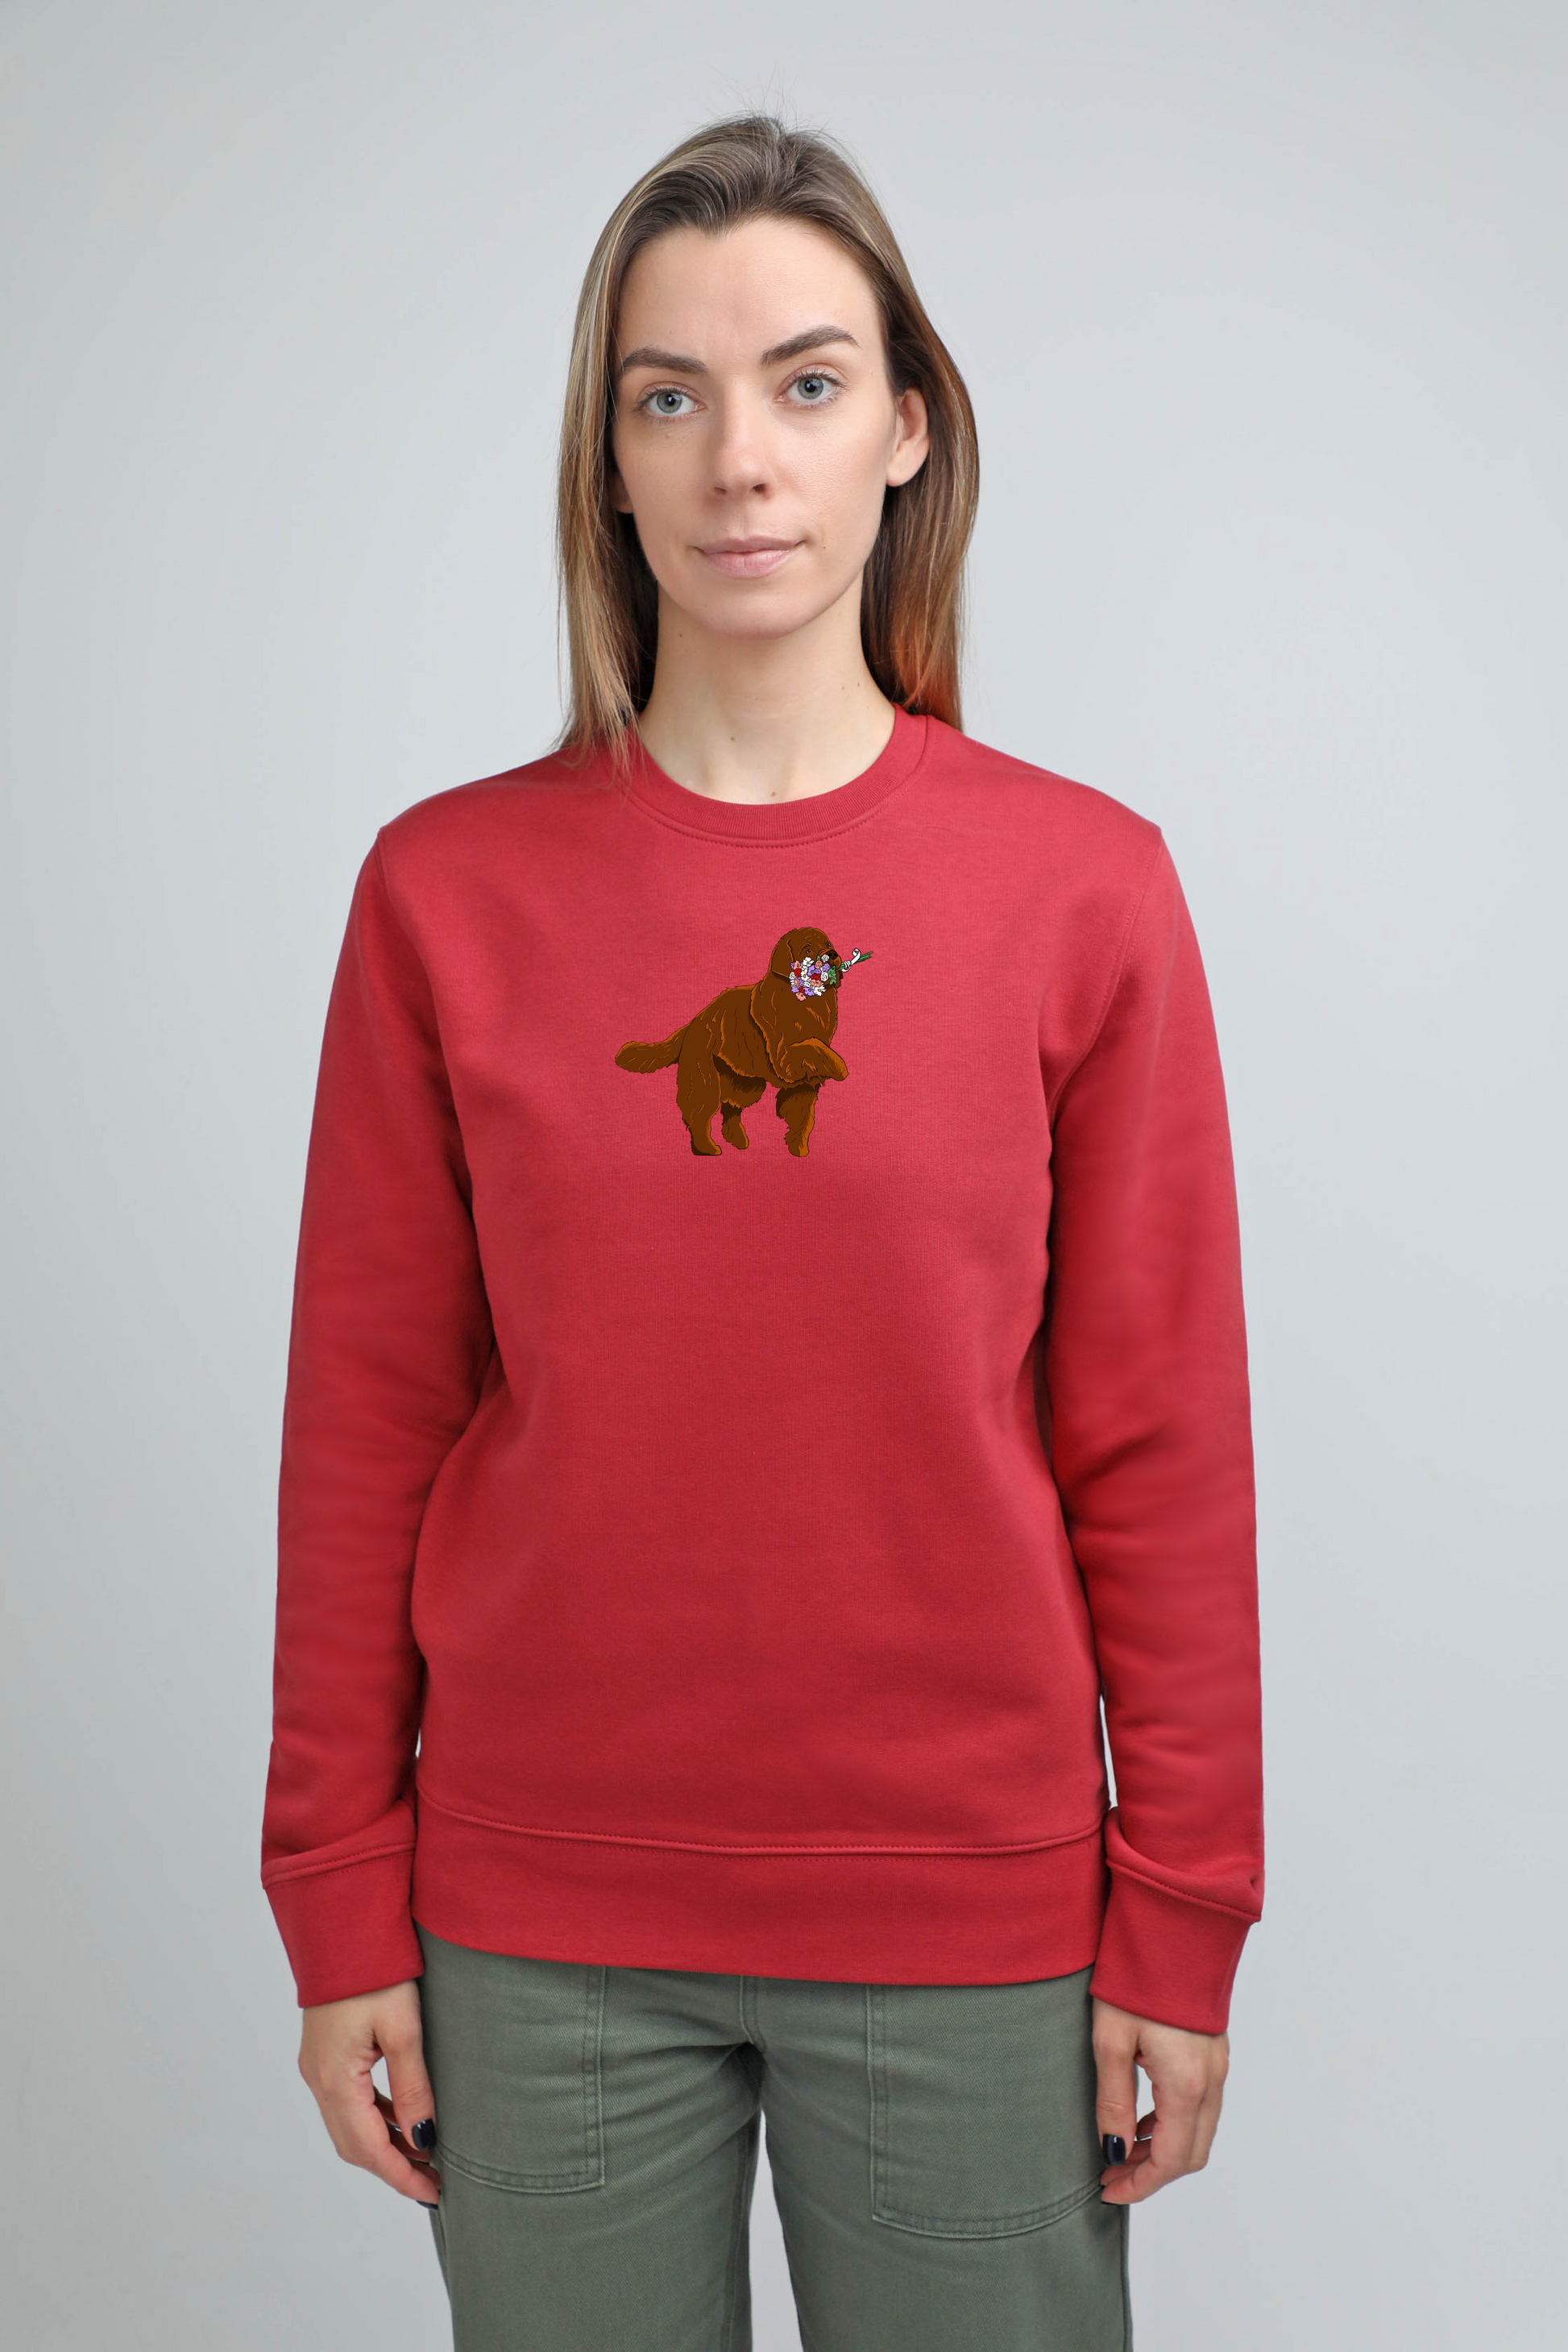 Giant dog with flowers | Crew neck sweatshirt with dog. Regular fit | Unisex by My Wild Other